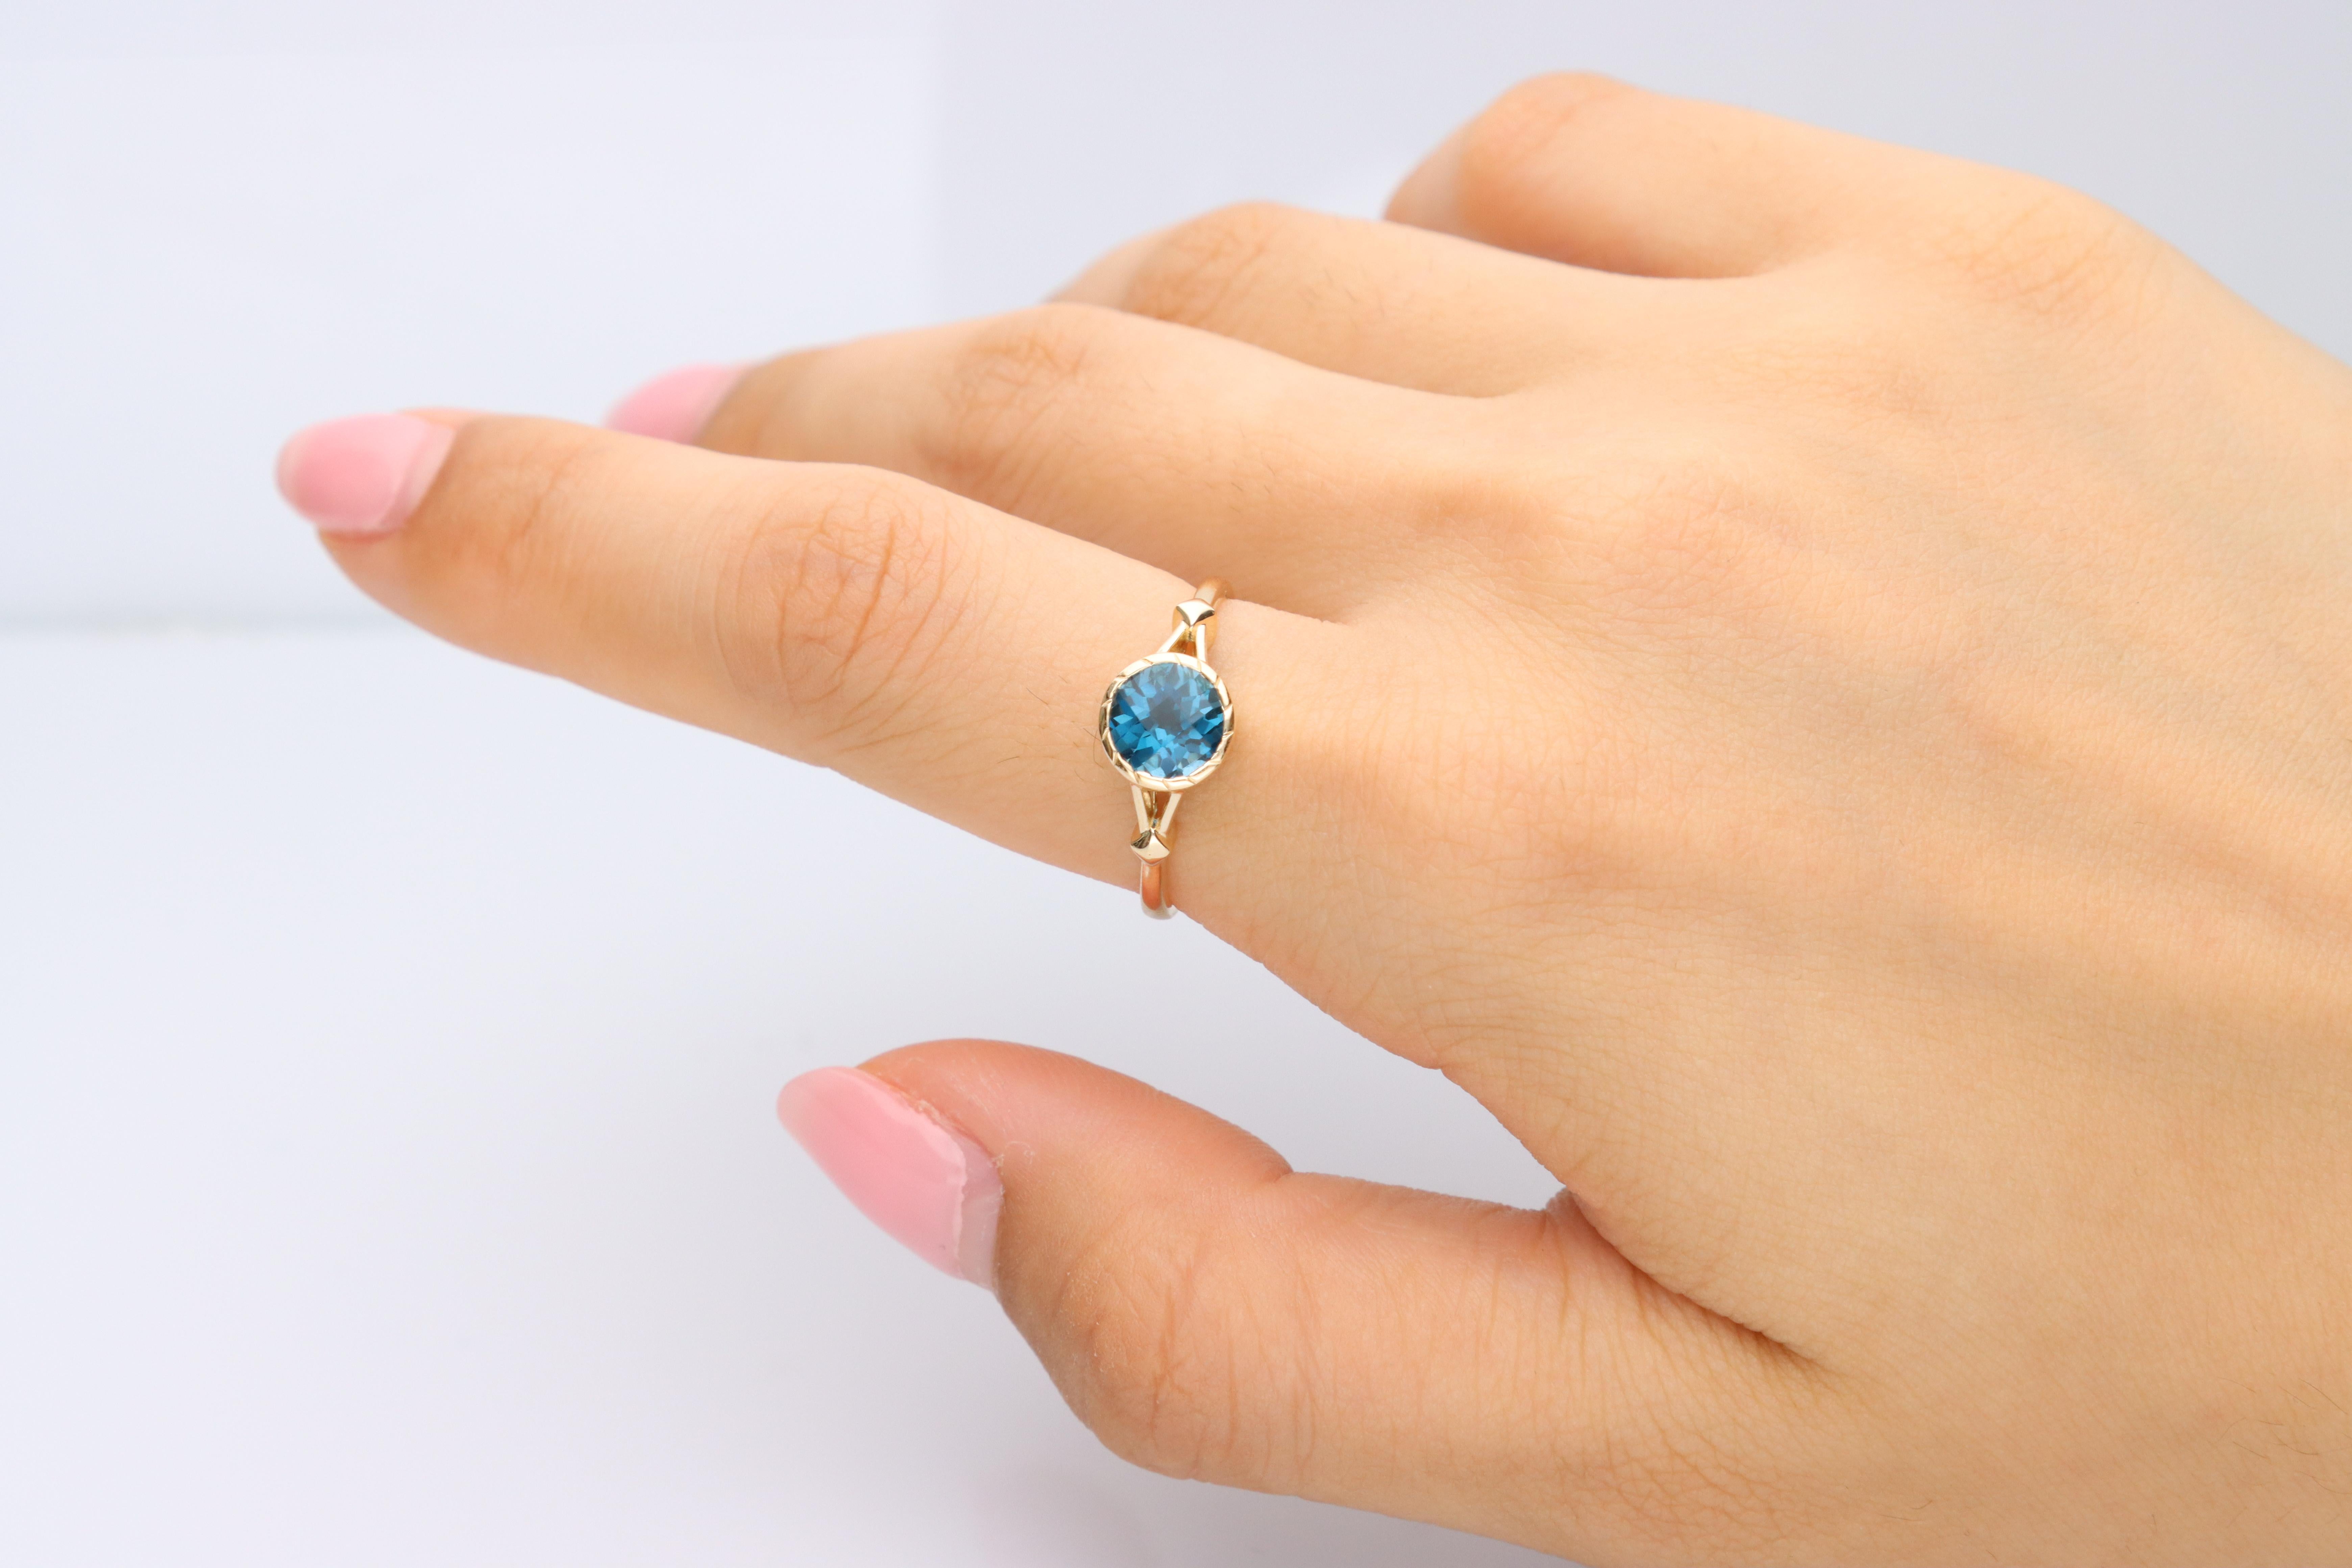 Stunning, timeless and classy eternity Unique Ring. Decorate yourself in luxury with this Gin & Grace Ring. The 14K Yellow Gold jewelry boasts with Round London Blue Topaz (1 pcs) 1.53 carat stones for a lovely design. This Ring is weight 1.93